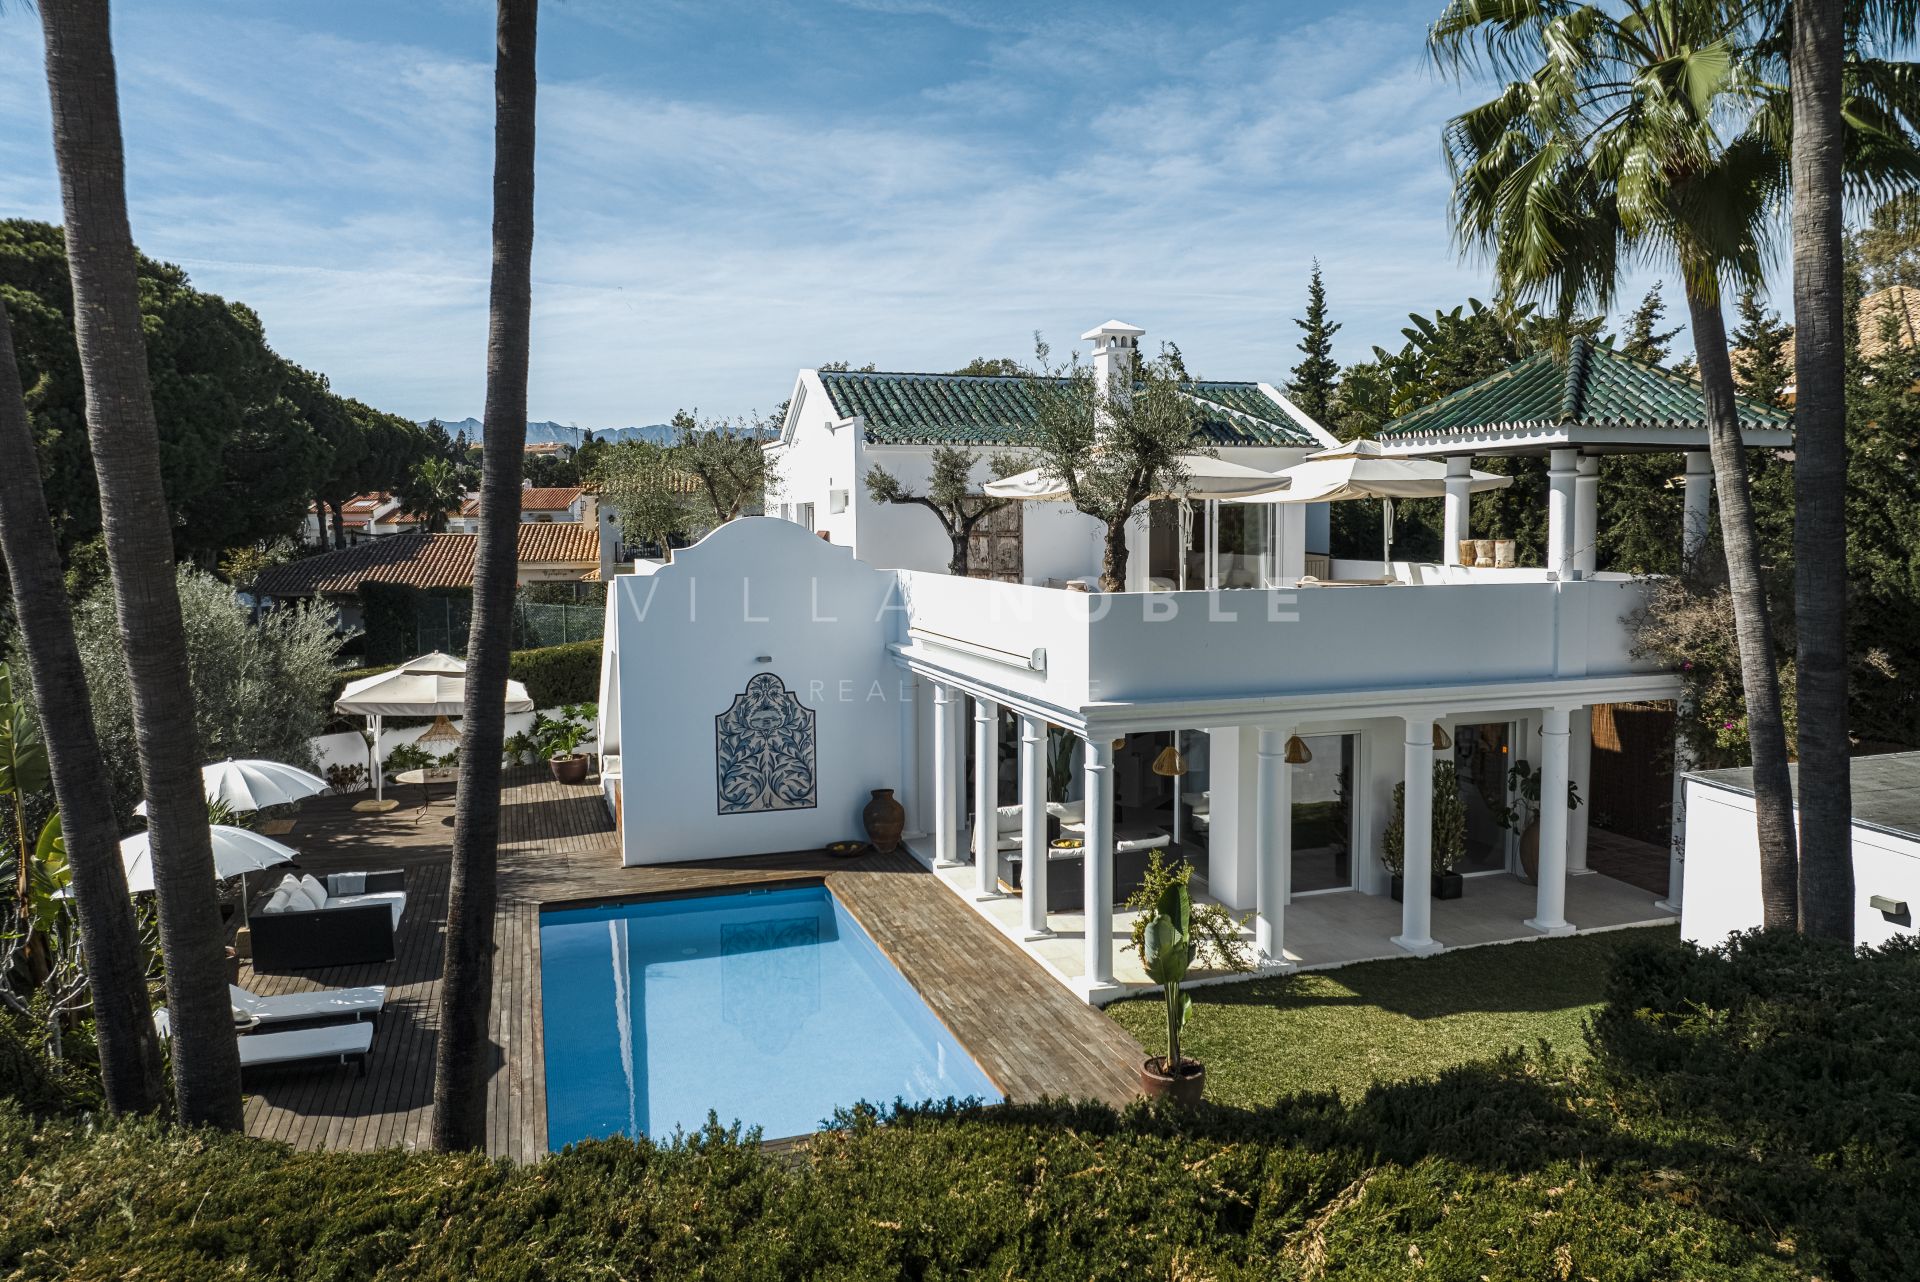 Charming 6 bedrooms beach house situated just a few meters from the sea and Artola dunes, Marbella